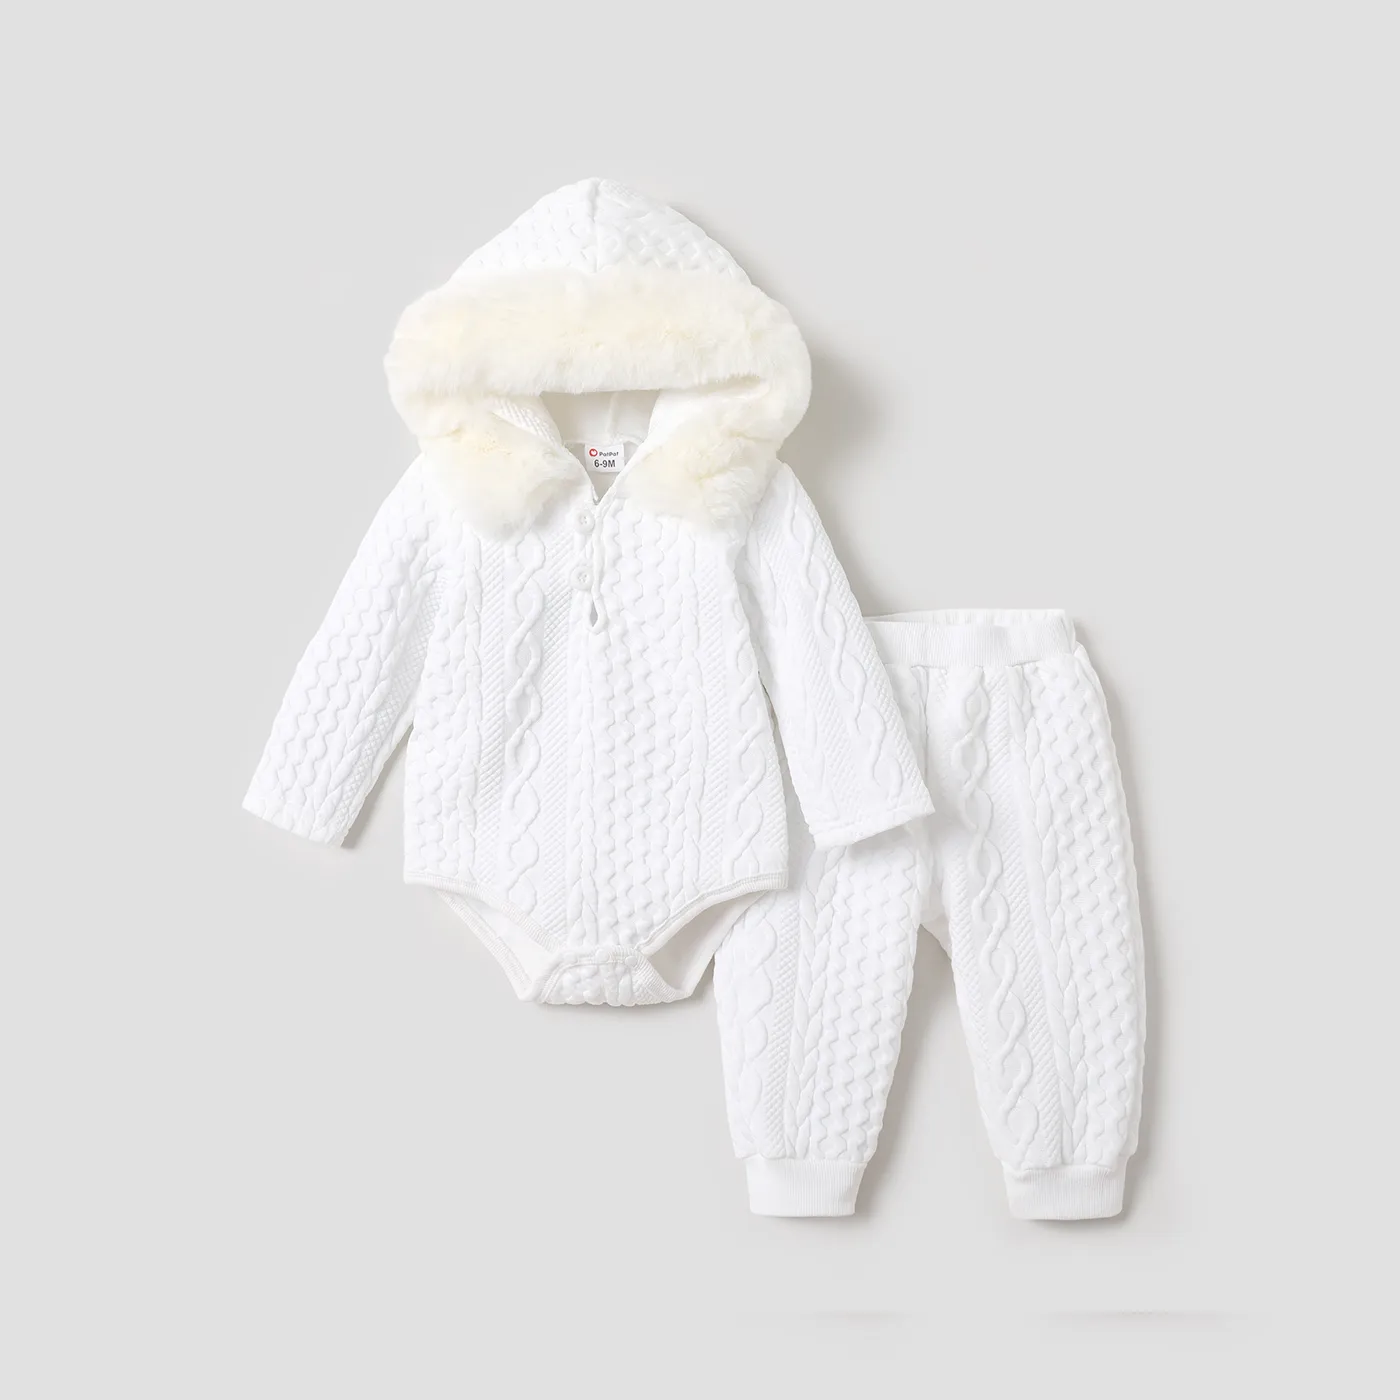 2pcs Baby Boy/Girl White Imitation Knitting Textured Spliced Faux Fur Hooded Long-sleeve Romper And Pants Set